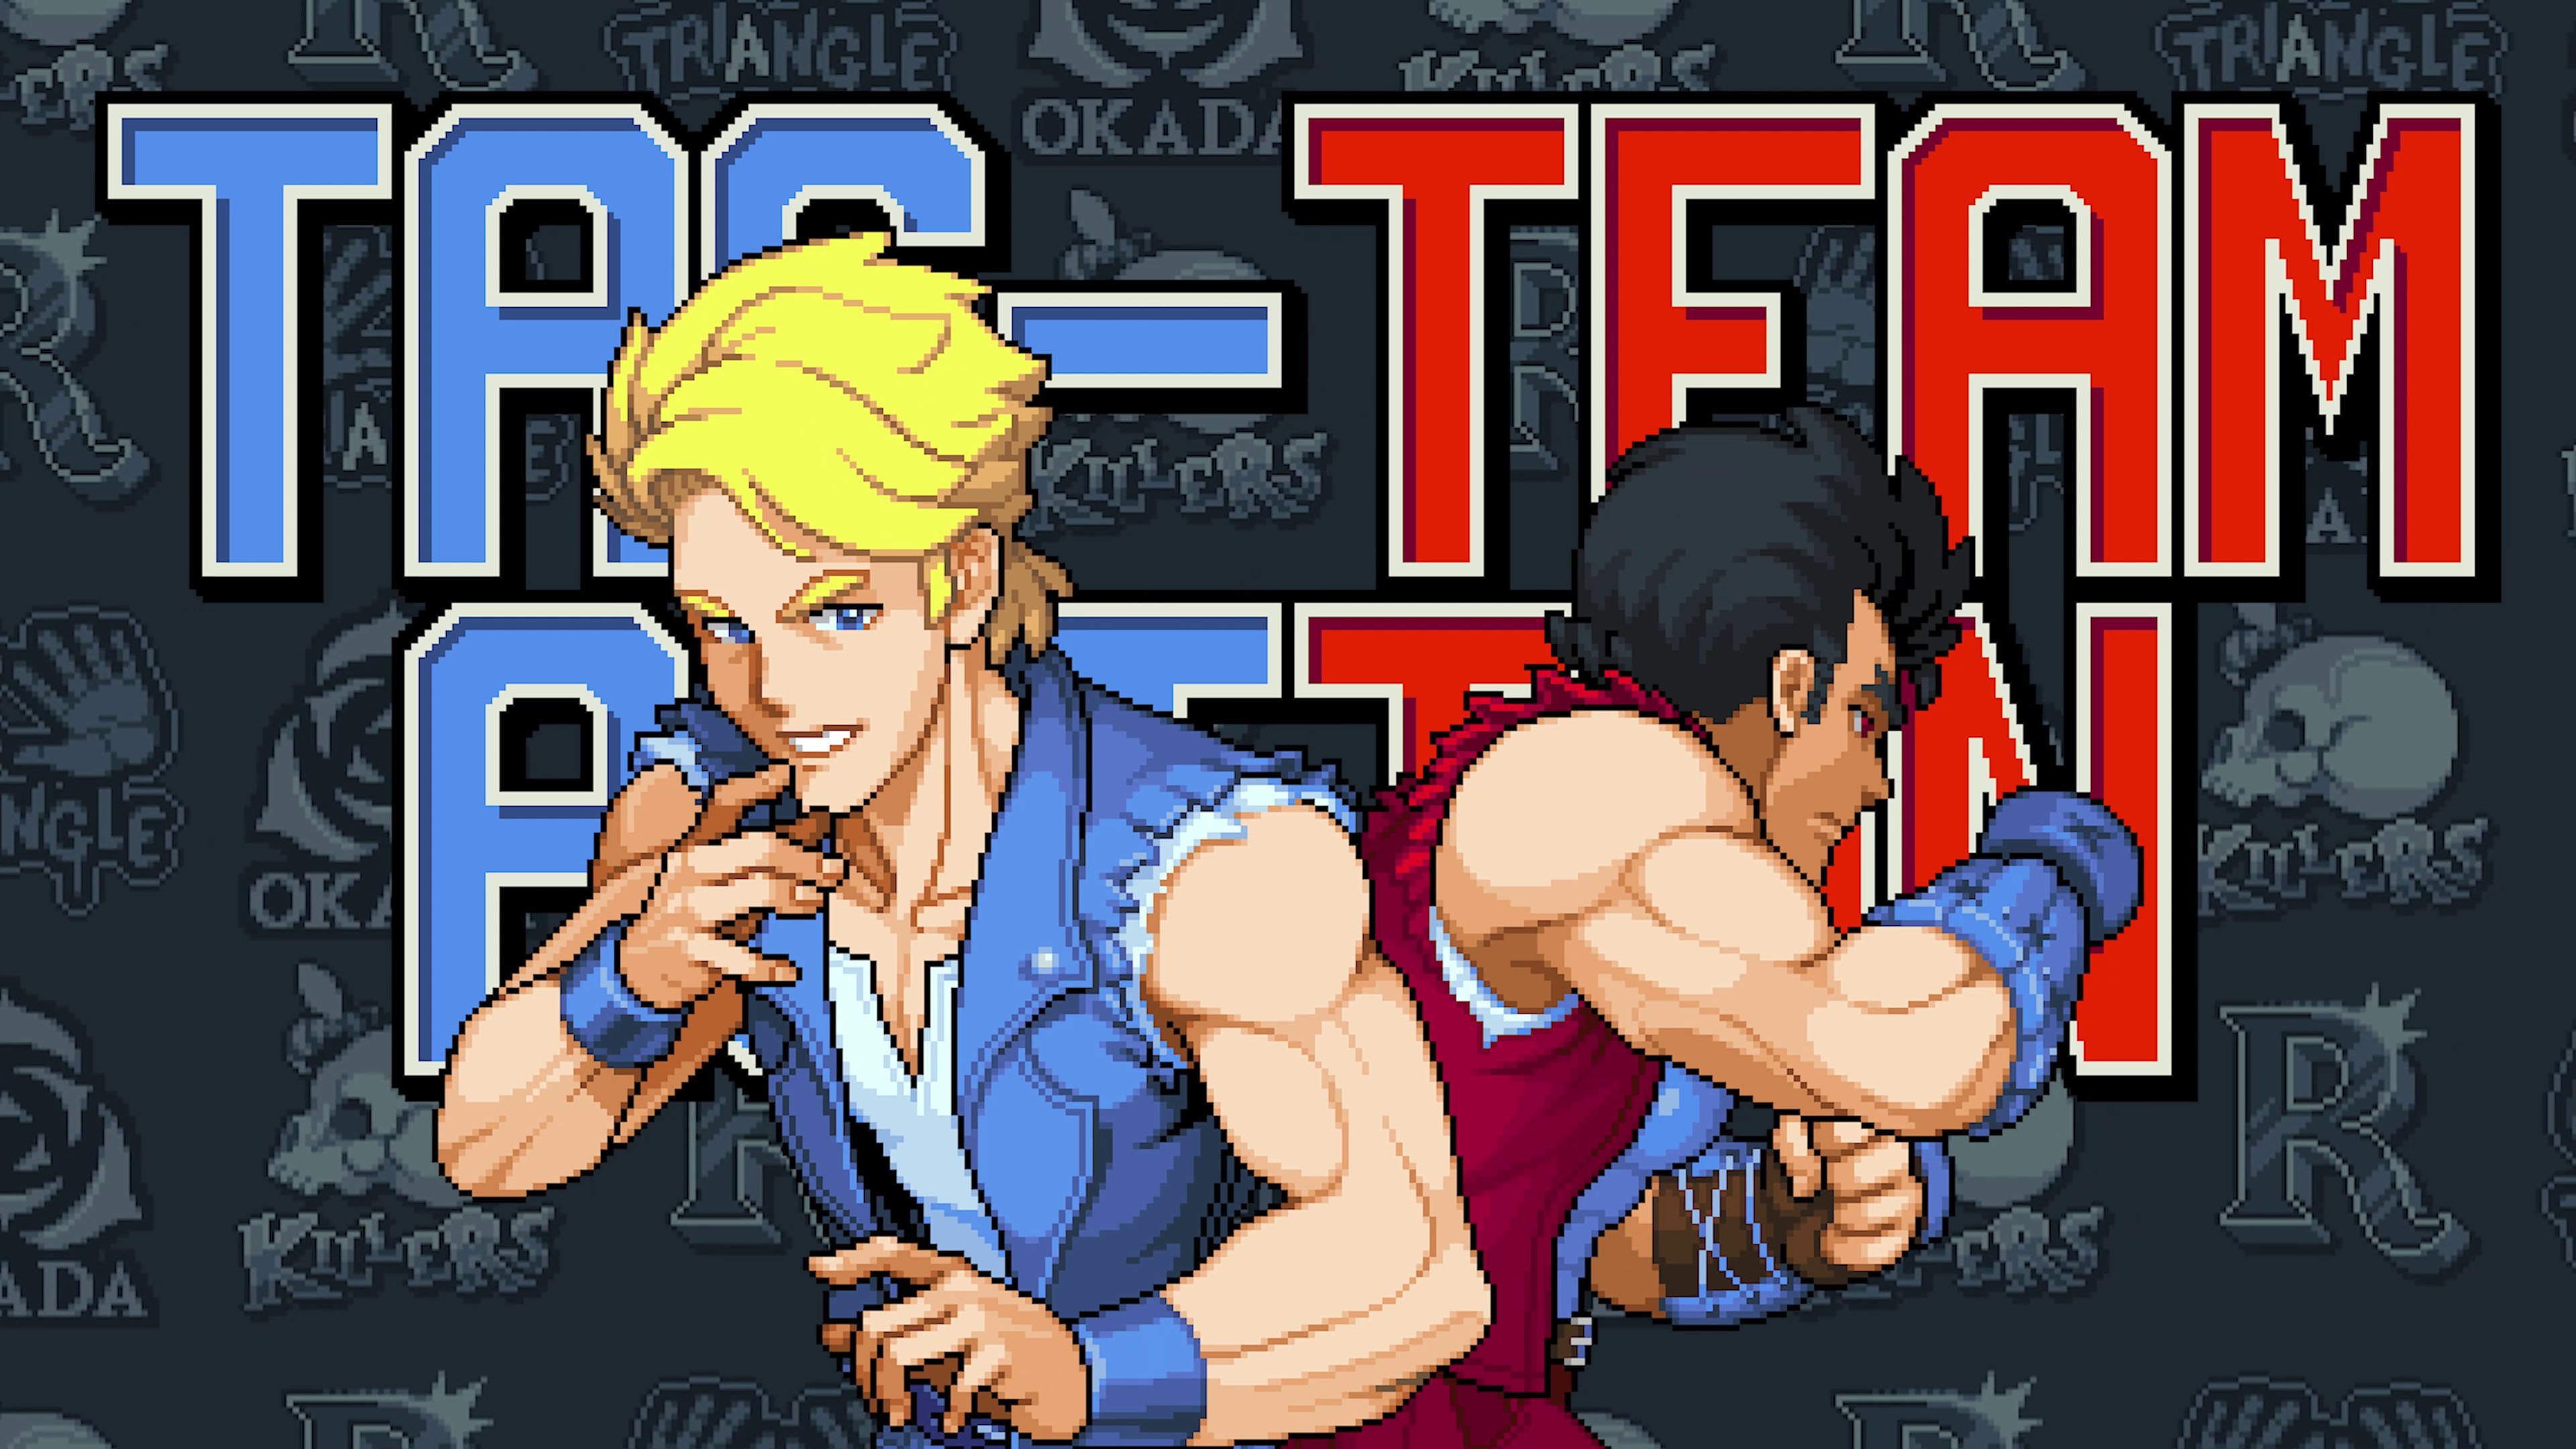 Play Arcade Double Dragon (Neo-Geo) Online in your browser 